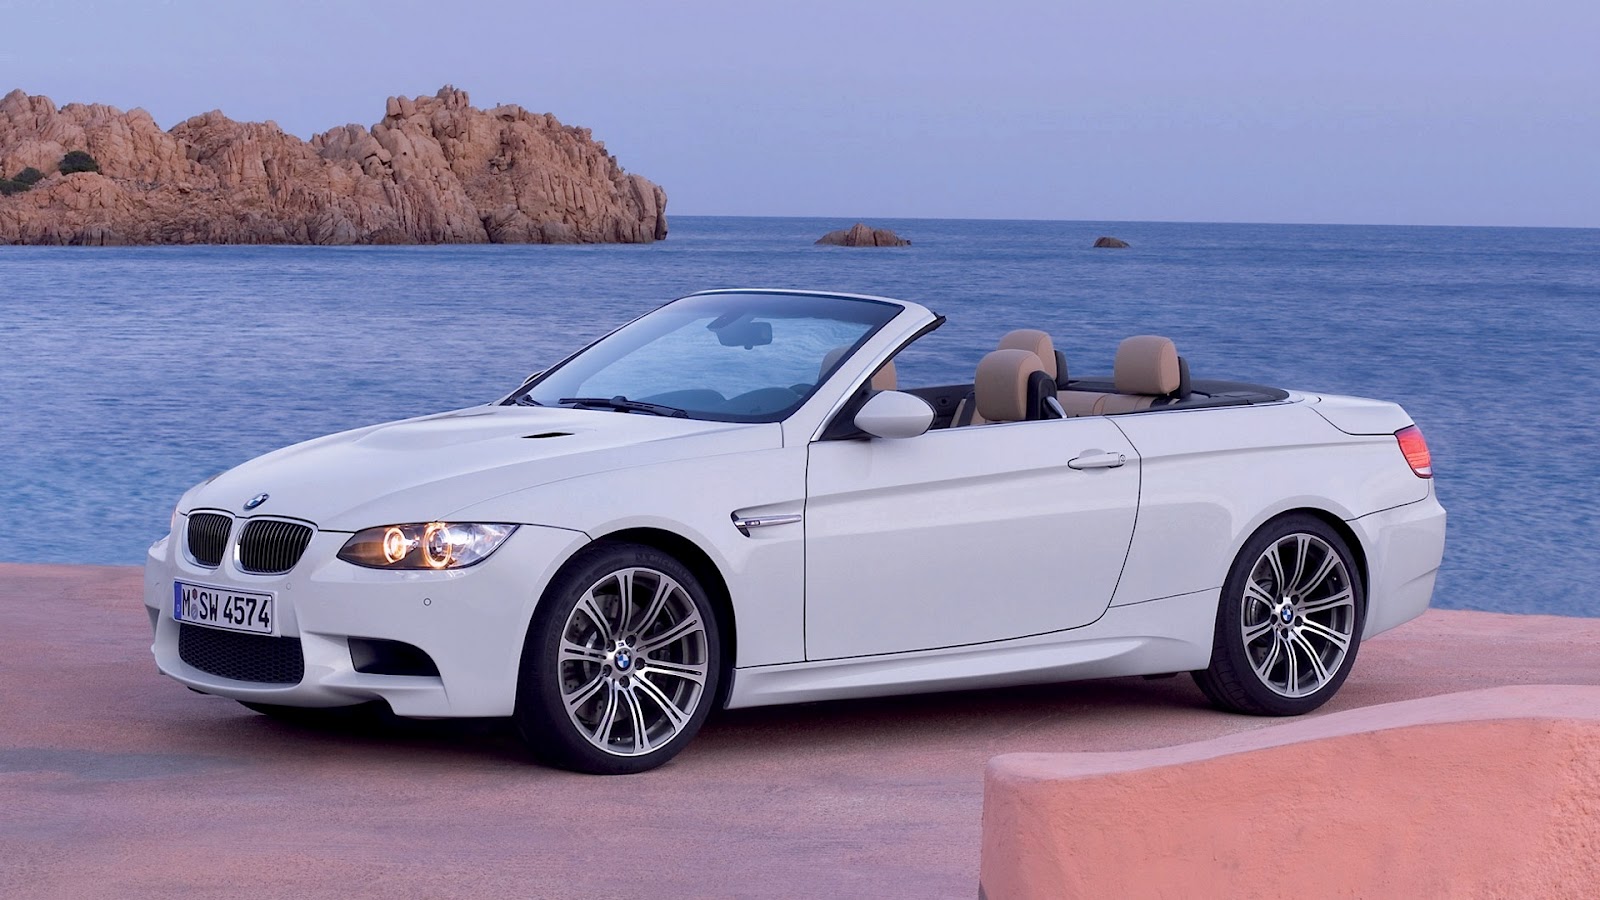 Bmw Car Images For Wallpaper